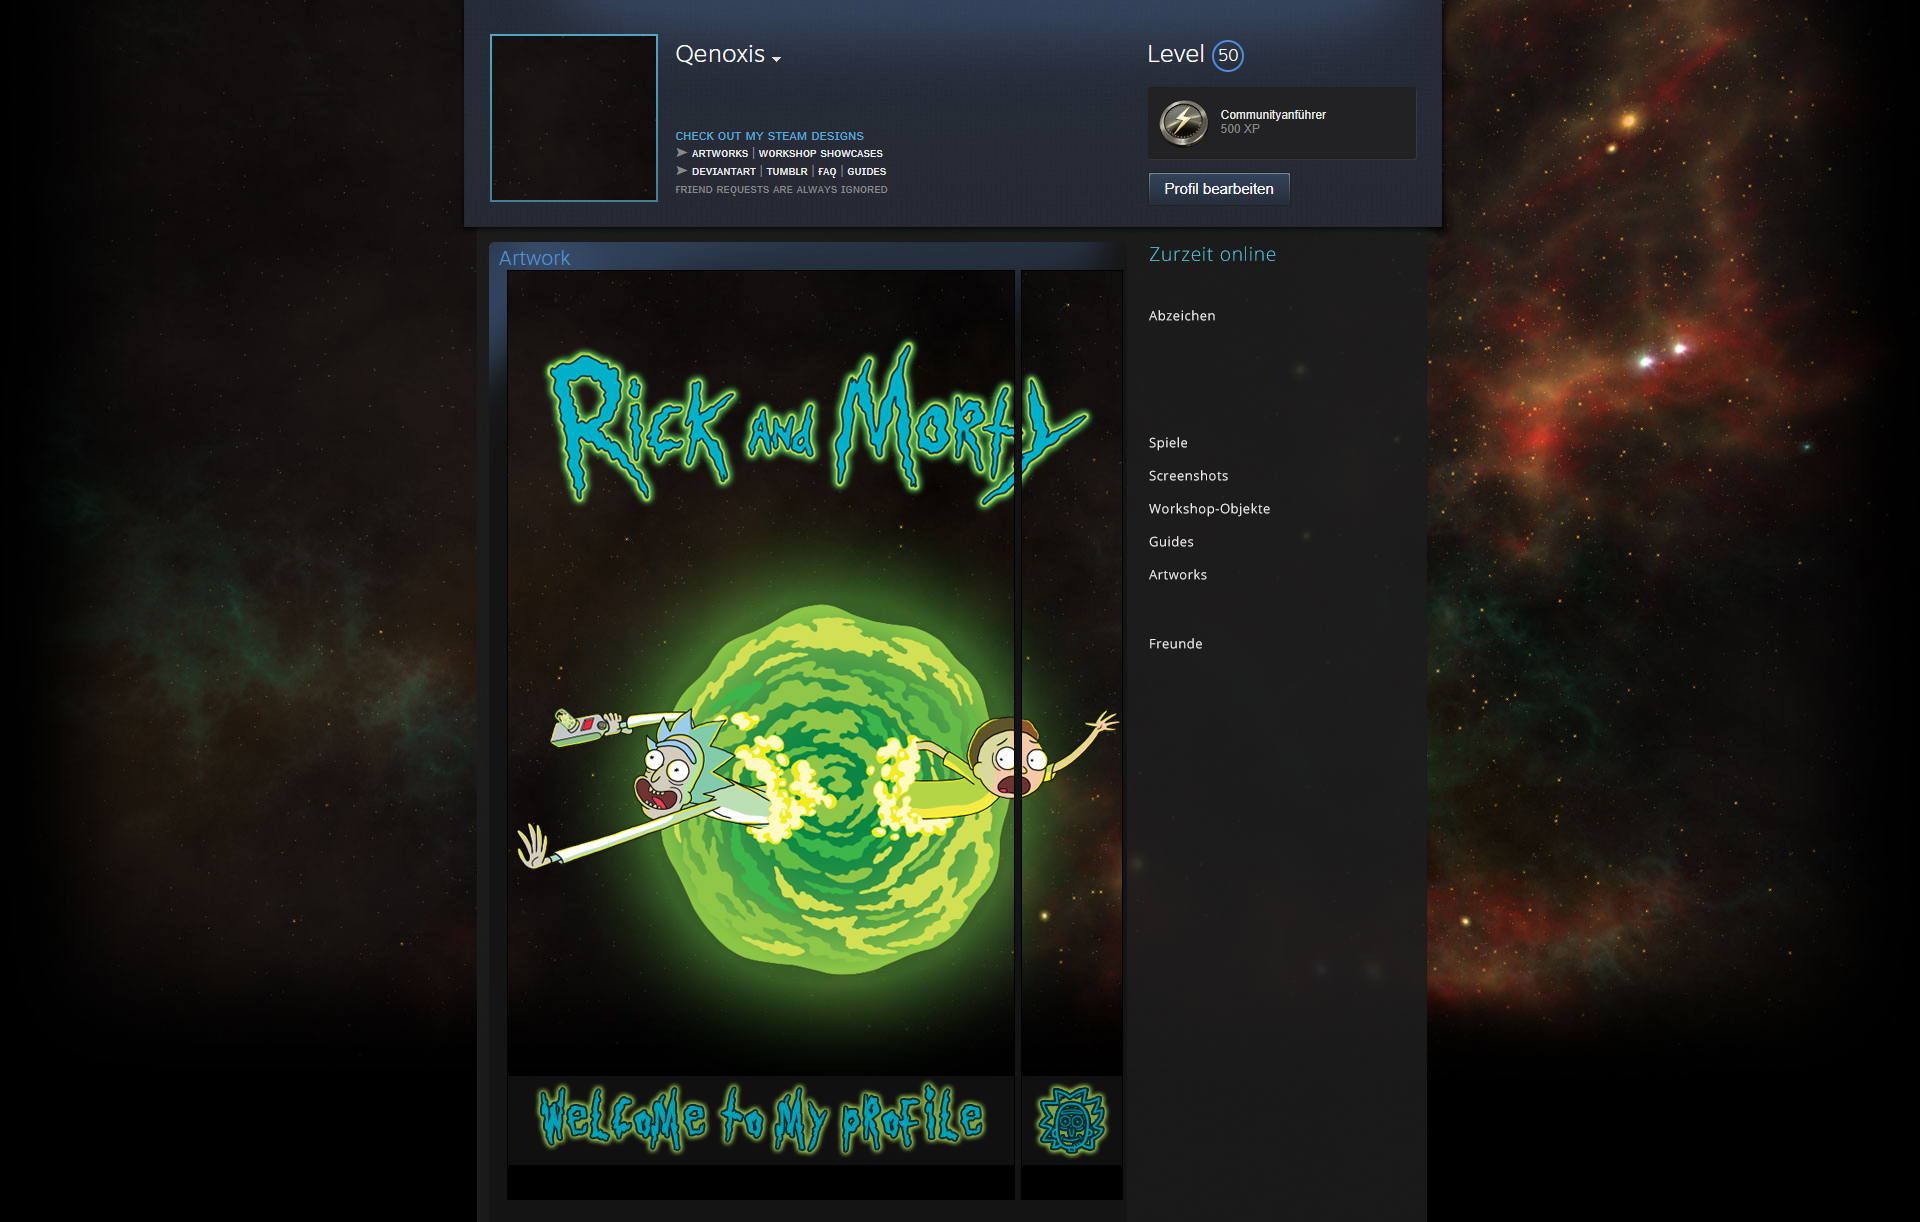 Rick And Morty Steam Steam Artwork Design - Rick and Morty by Qenoxis on DeviantArt